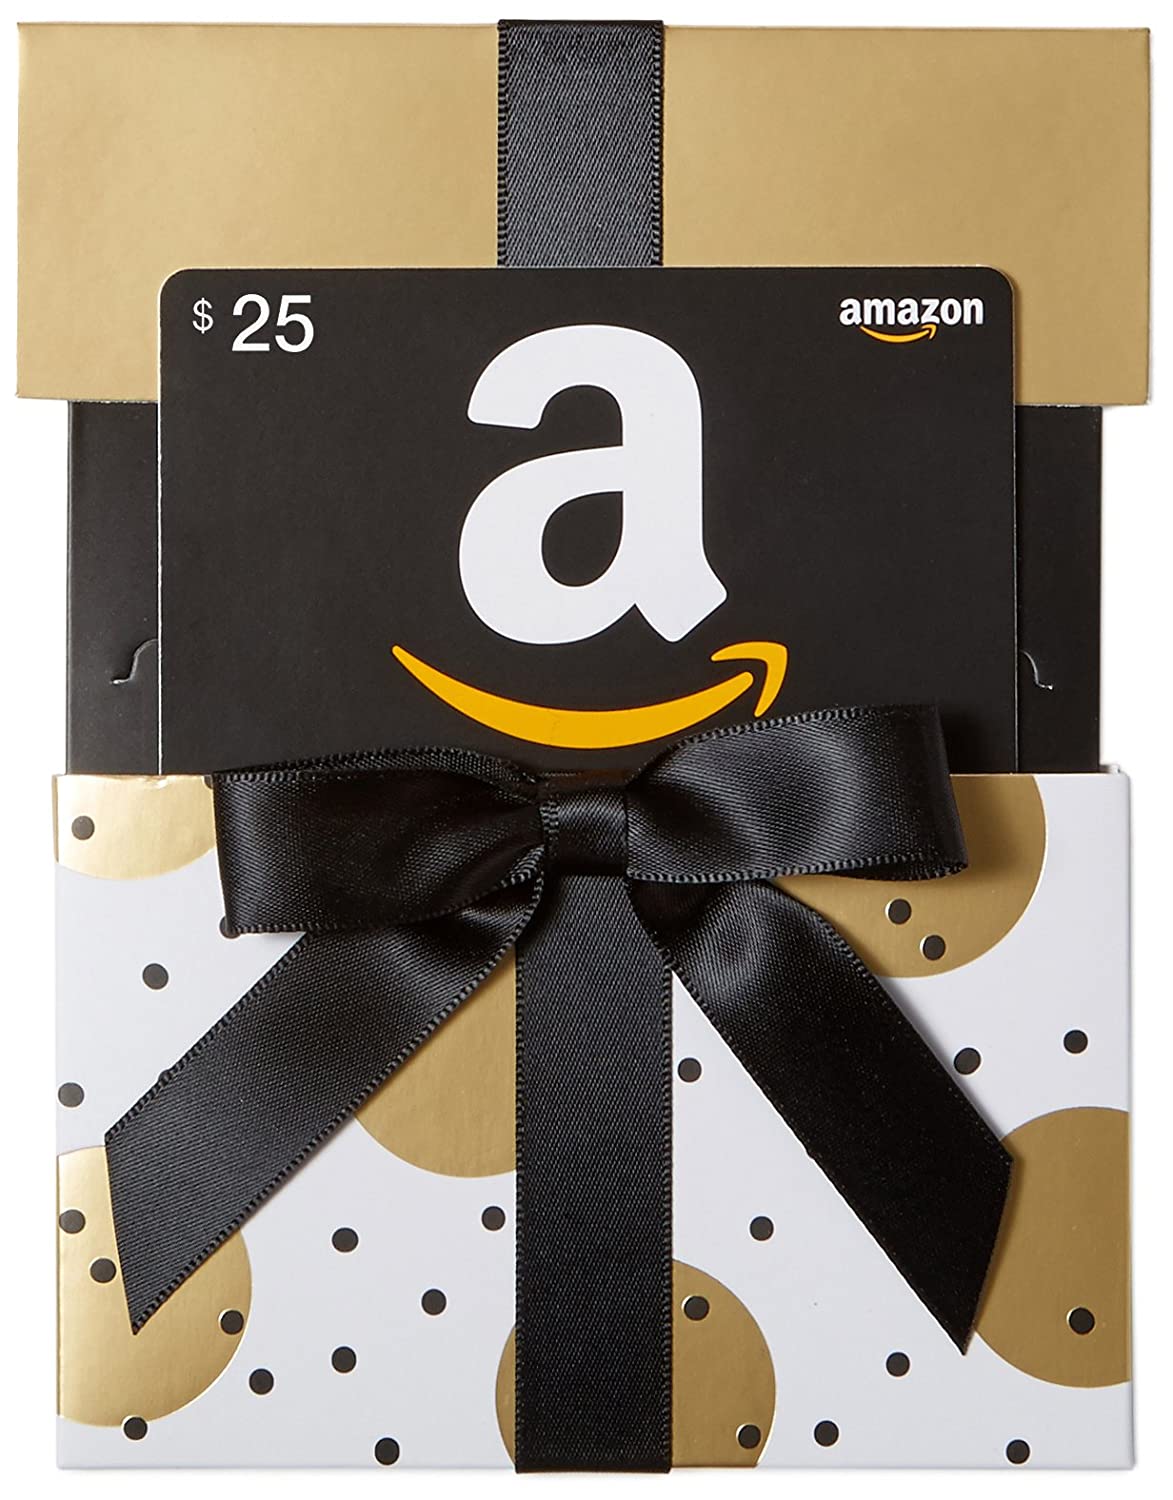 Amazon.com Gift Card in a Reveal (Various Designs)